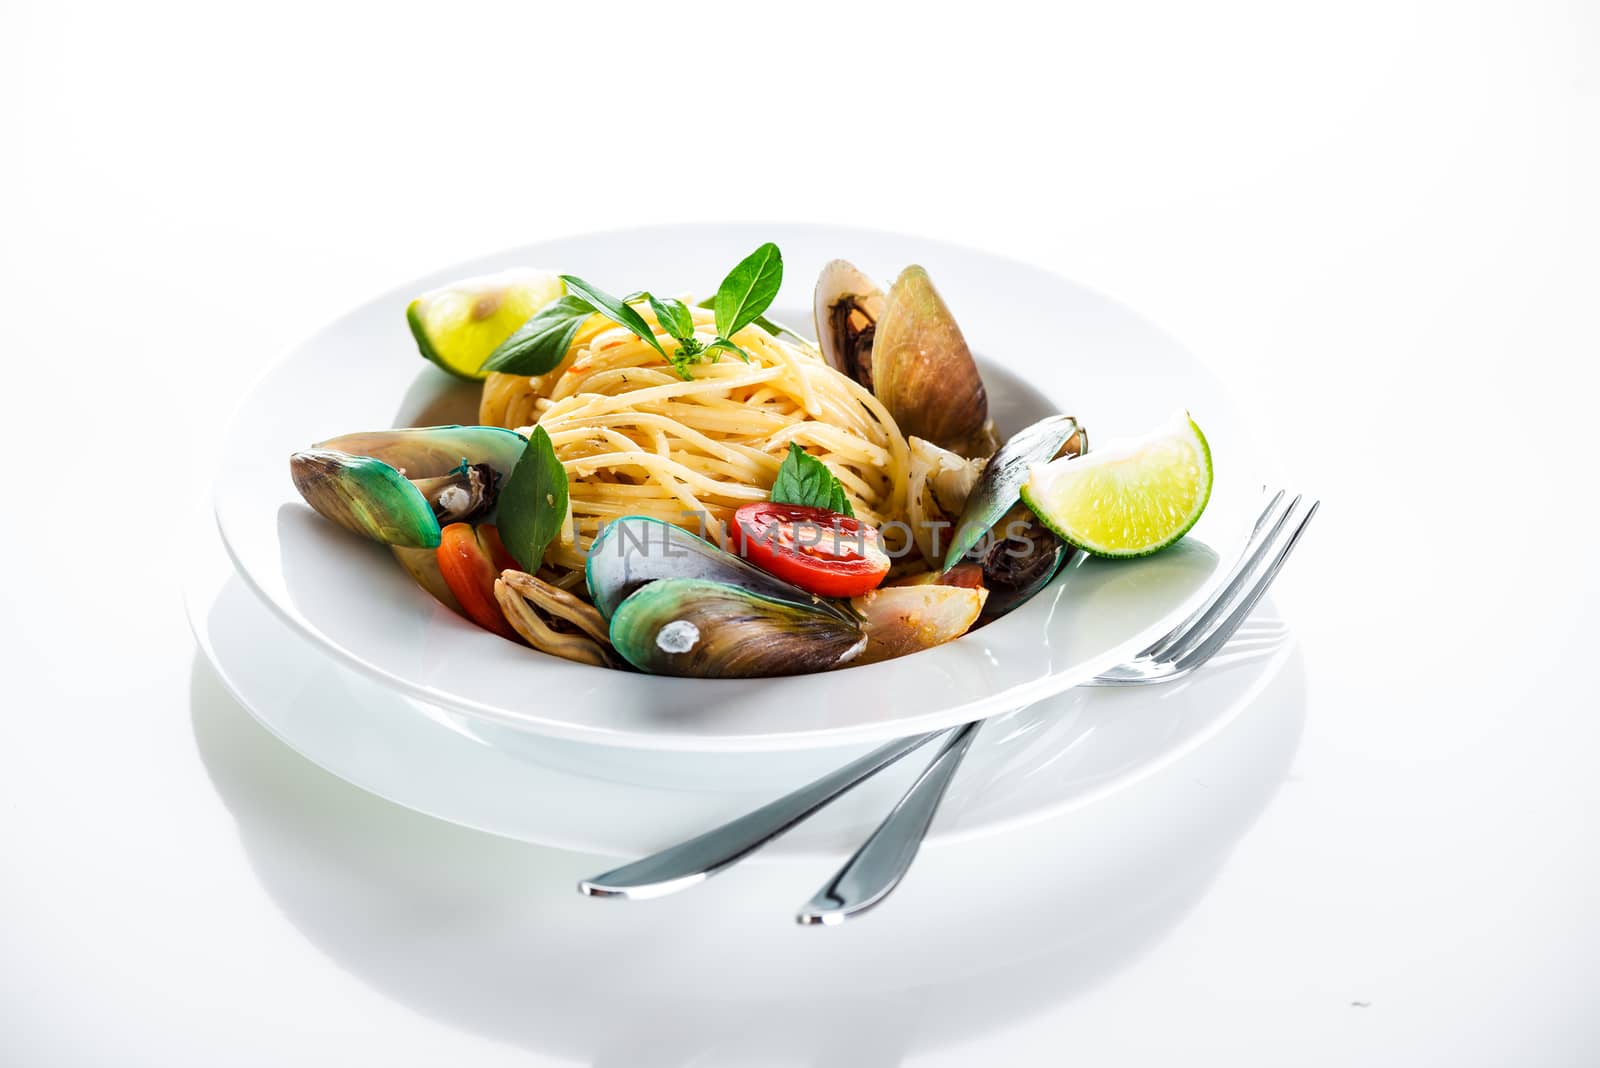 Fresh and spicy seafood pasta in white plate on white background